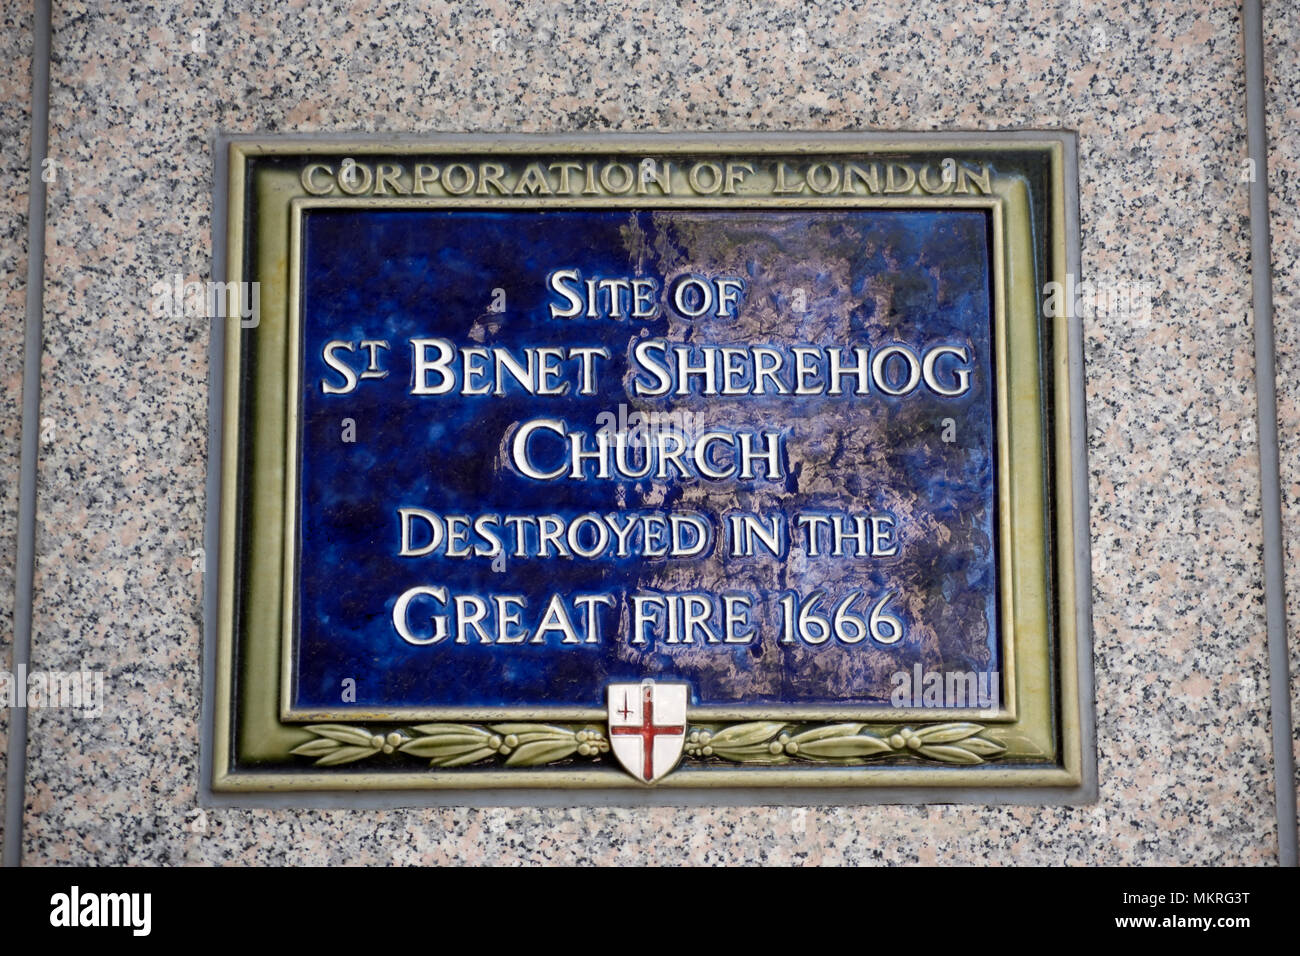 city of london blue plaque marking the site of st benet sherehog church, destroyed in the great fire of 1666 Stock Photo